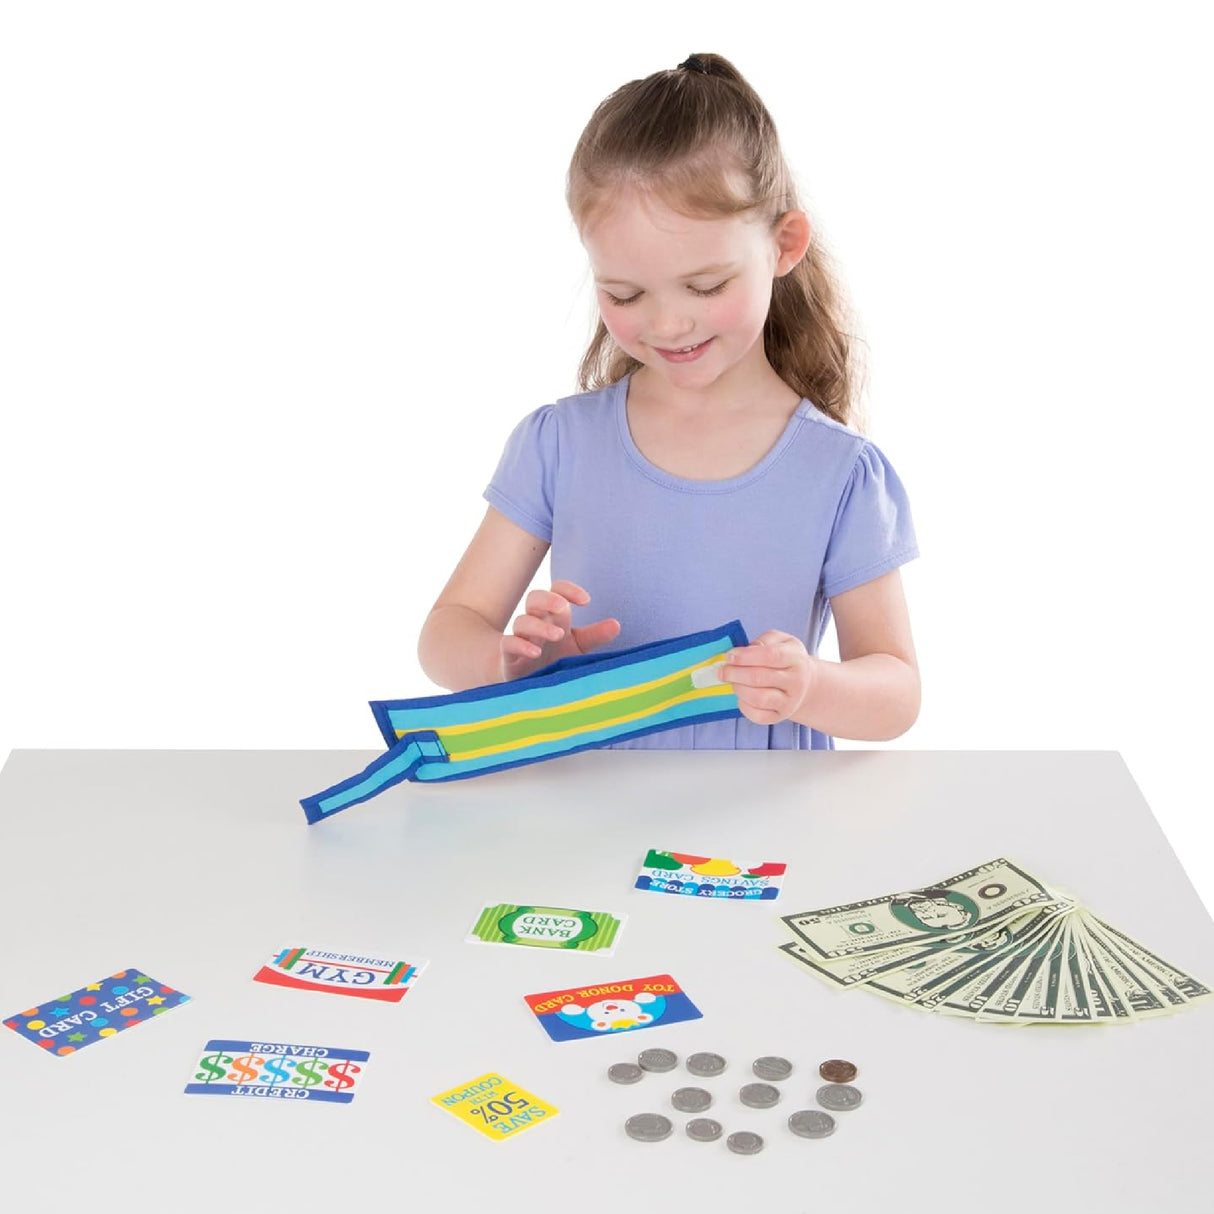 Melissa & Doug Pretend-to-Spend Toy Wallet With Play Money and Cards (45 pcs) - Blue